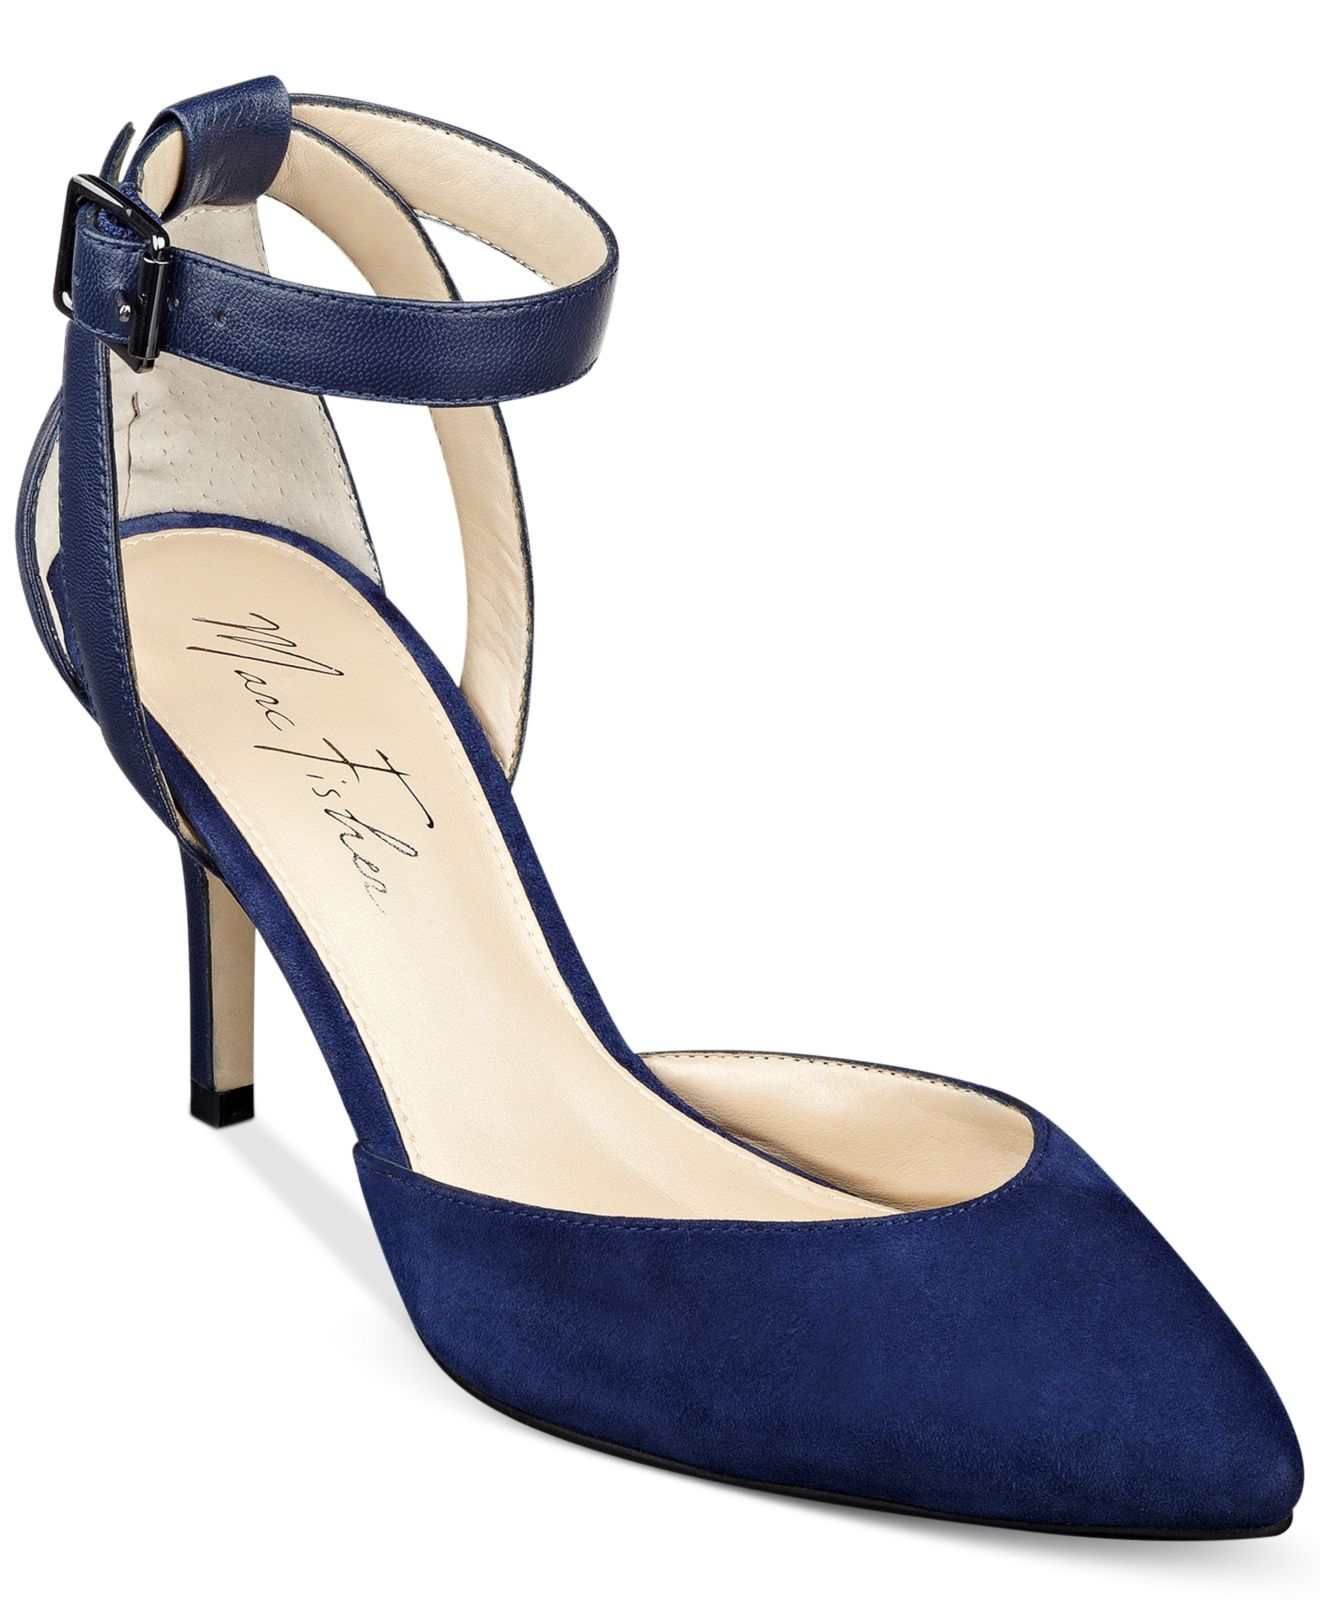 Marc Fisher Hien Ankle Strap Pumps in Navy Suede (Blue) - Lyst